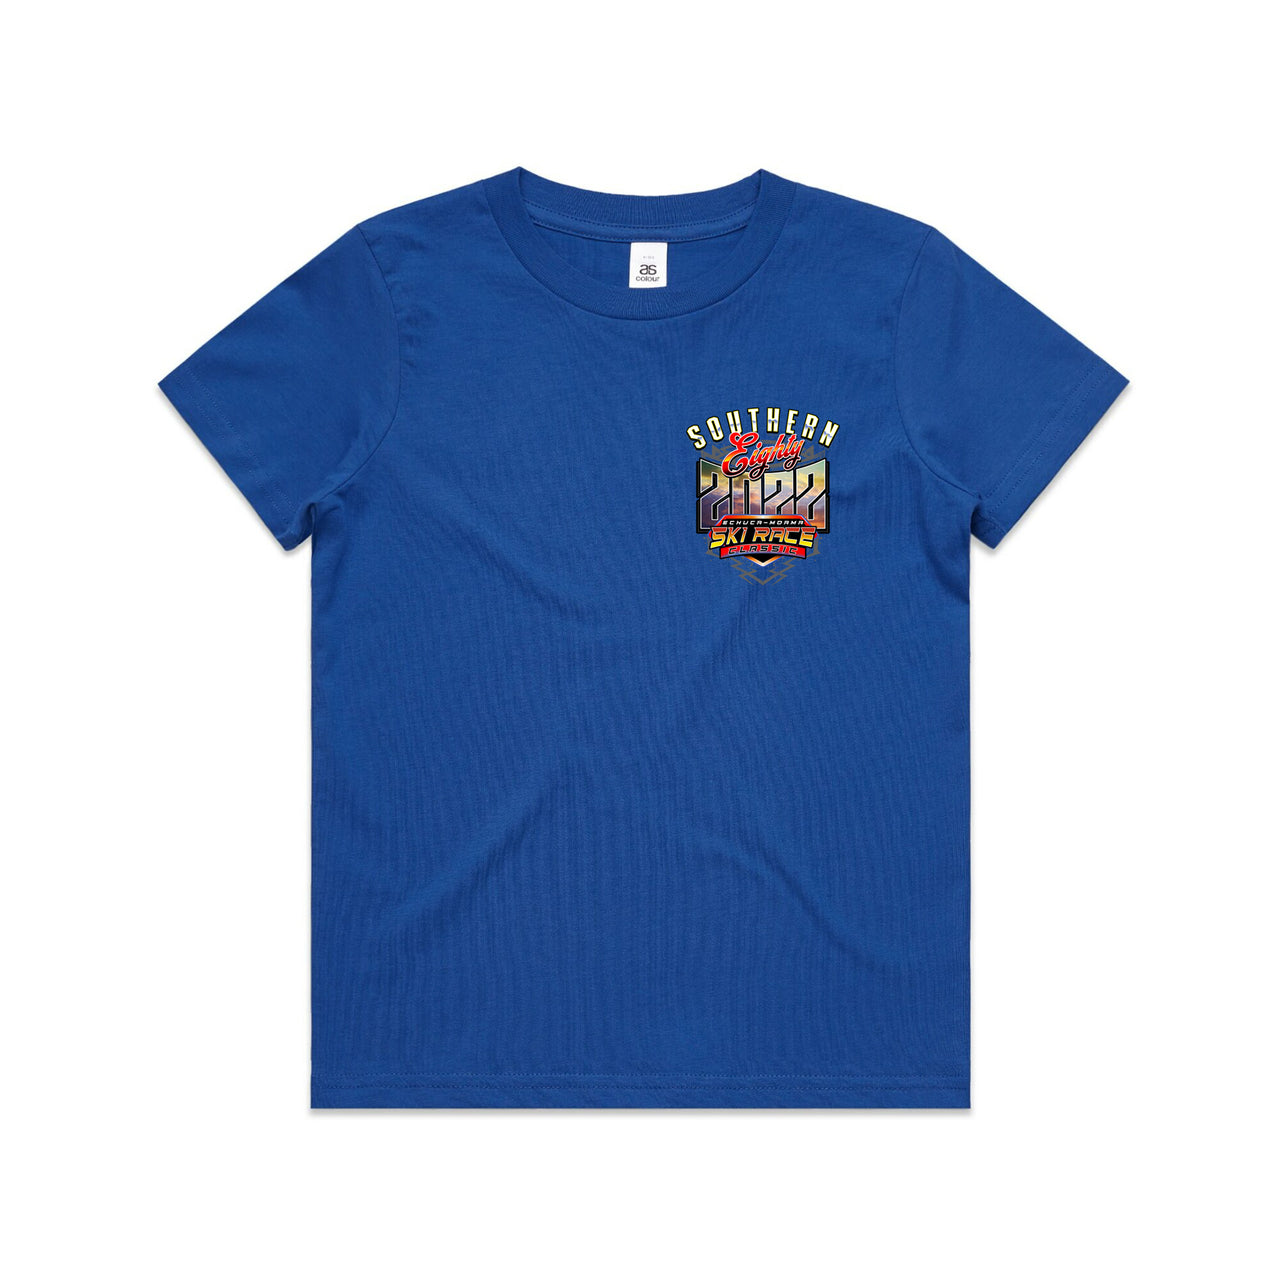 Southern 80 2022 Event Youth Kids Tee